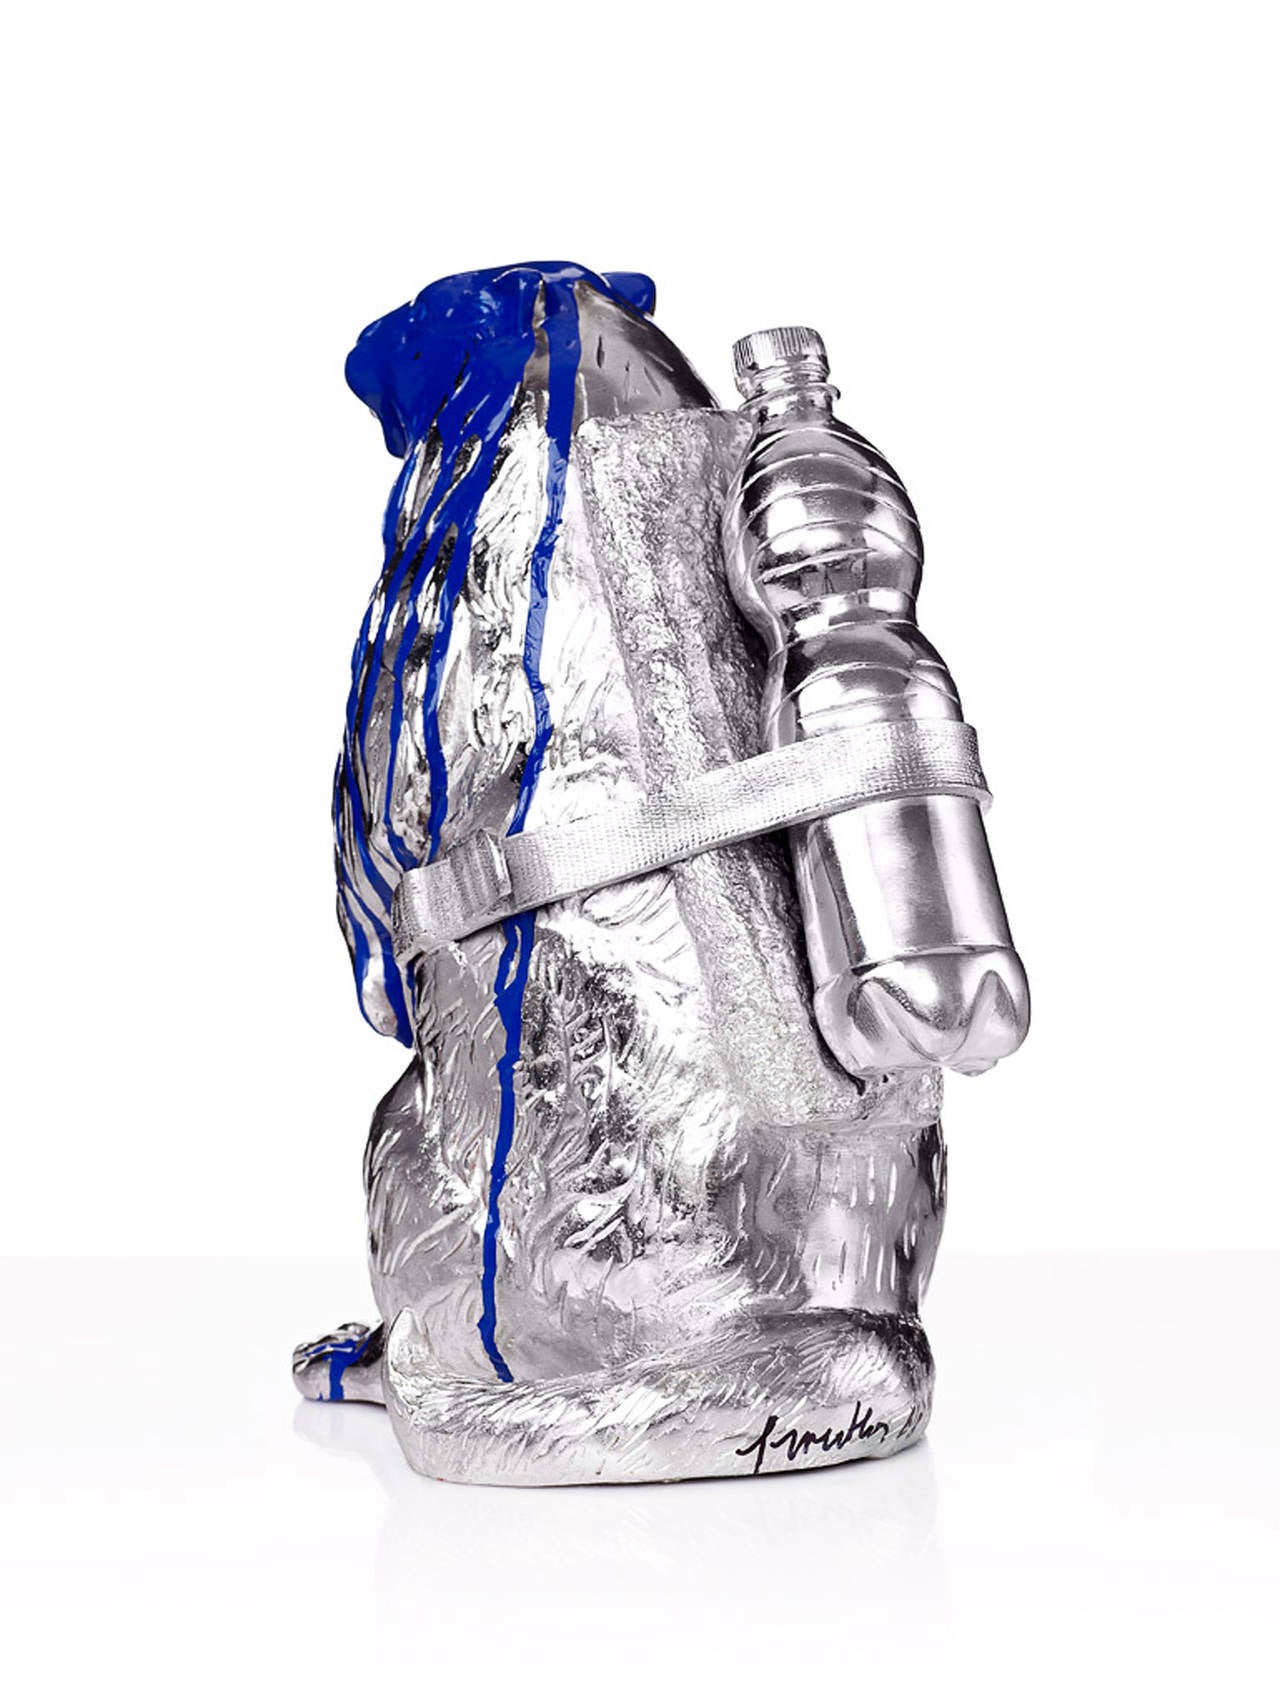 Cloned Marmot with pet bottle. - Sculpture by William Sweetlove